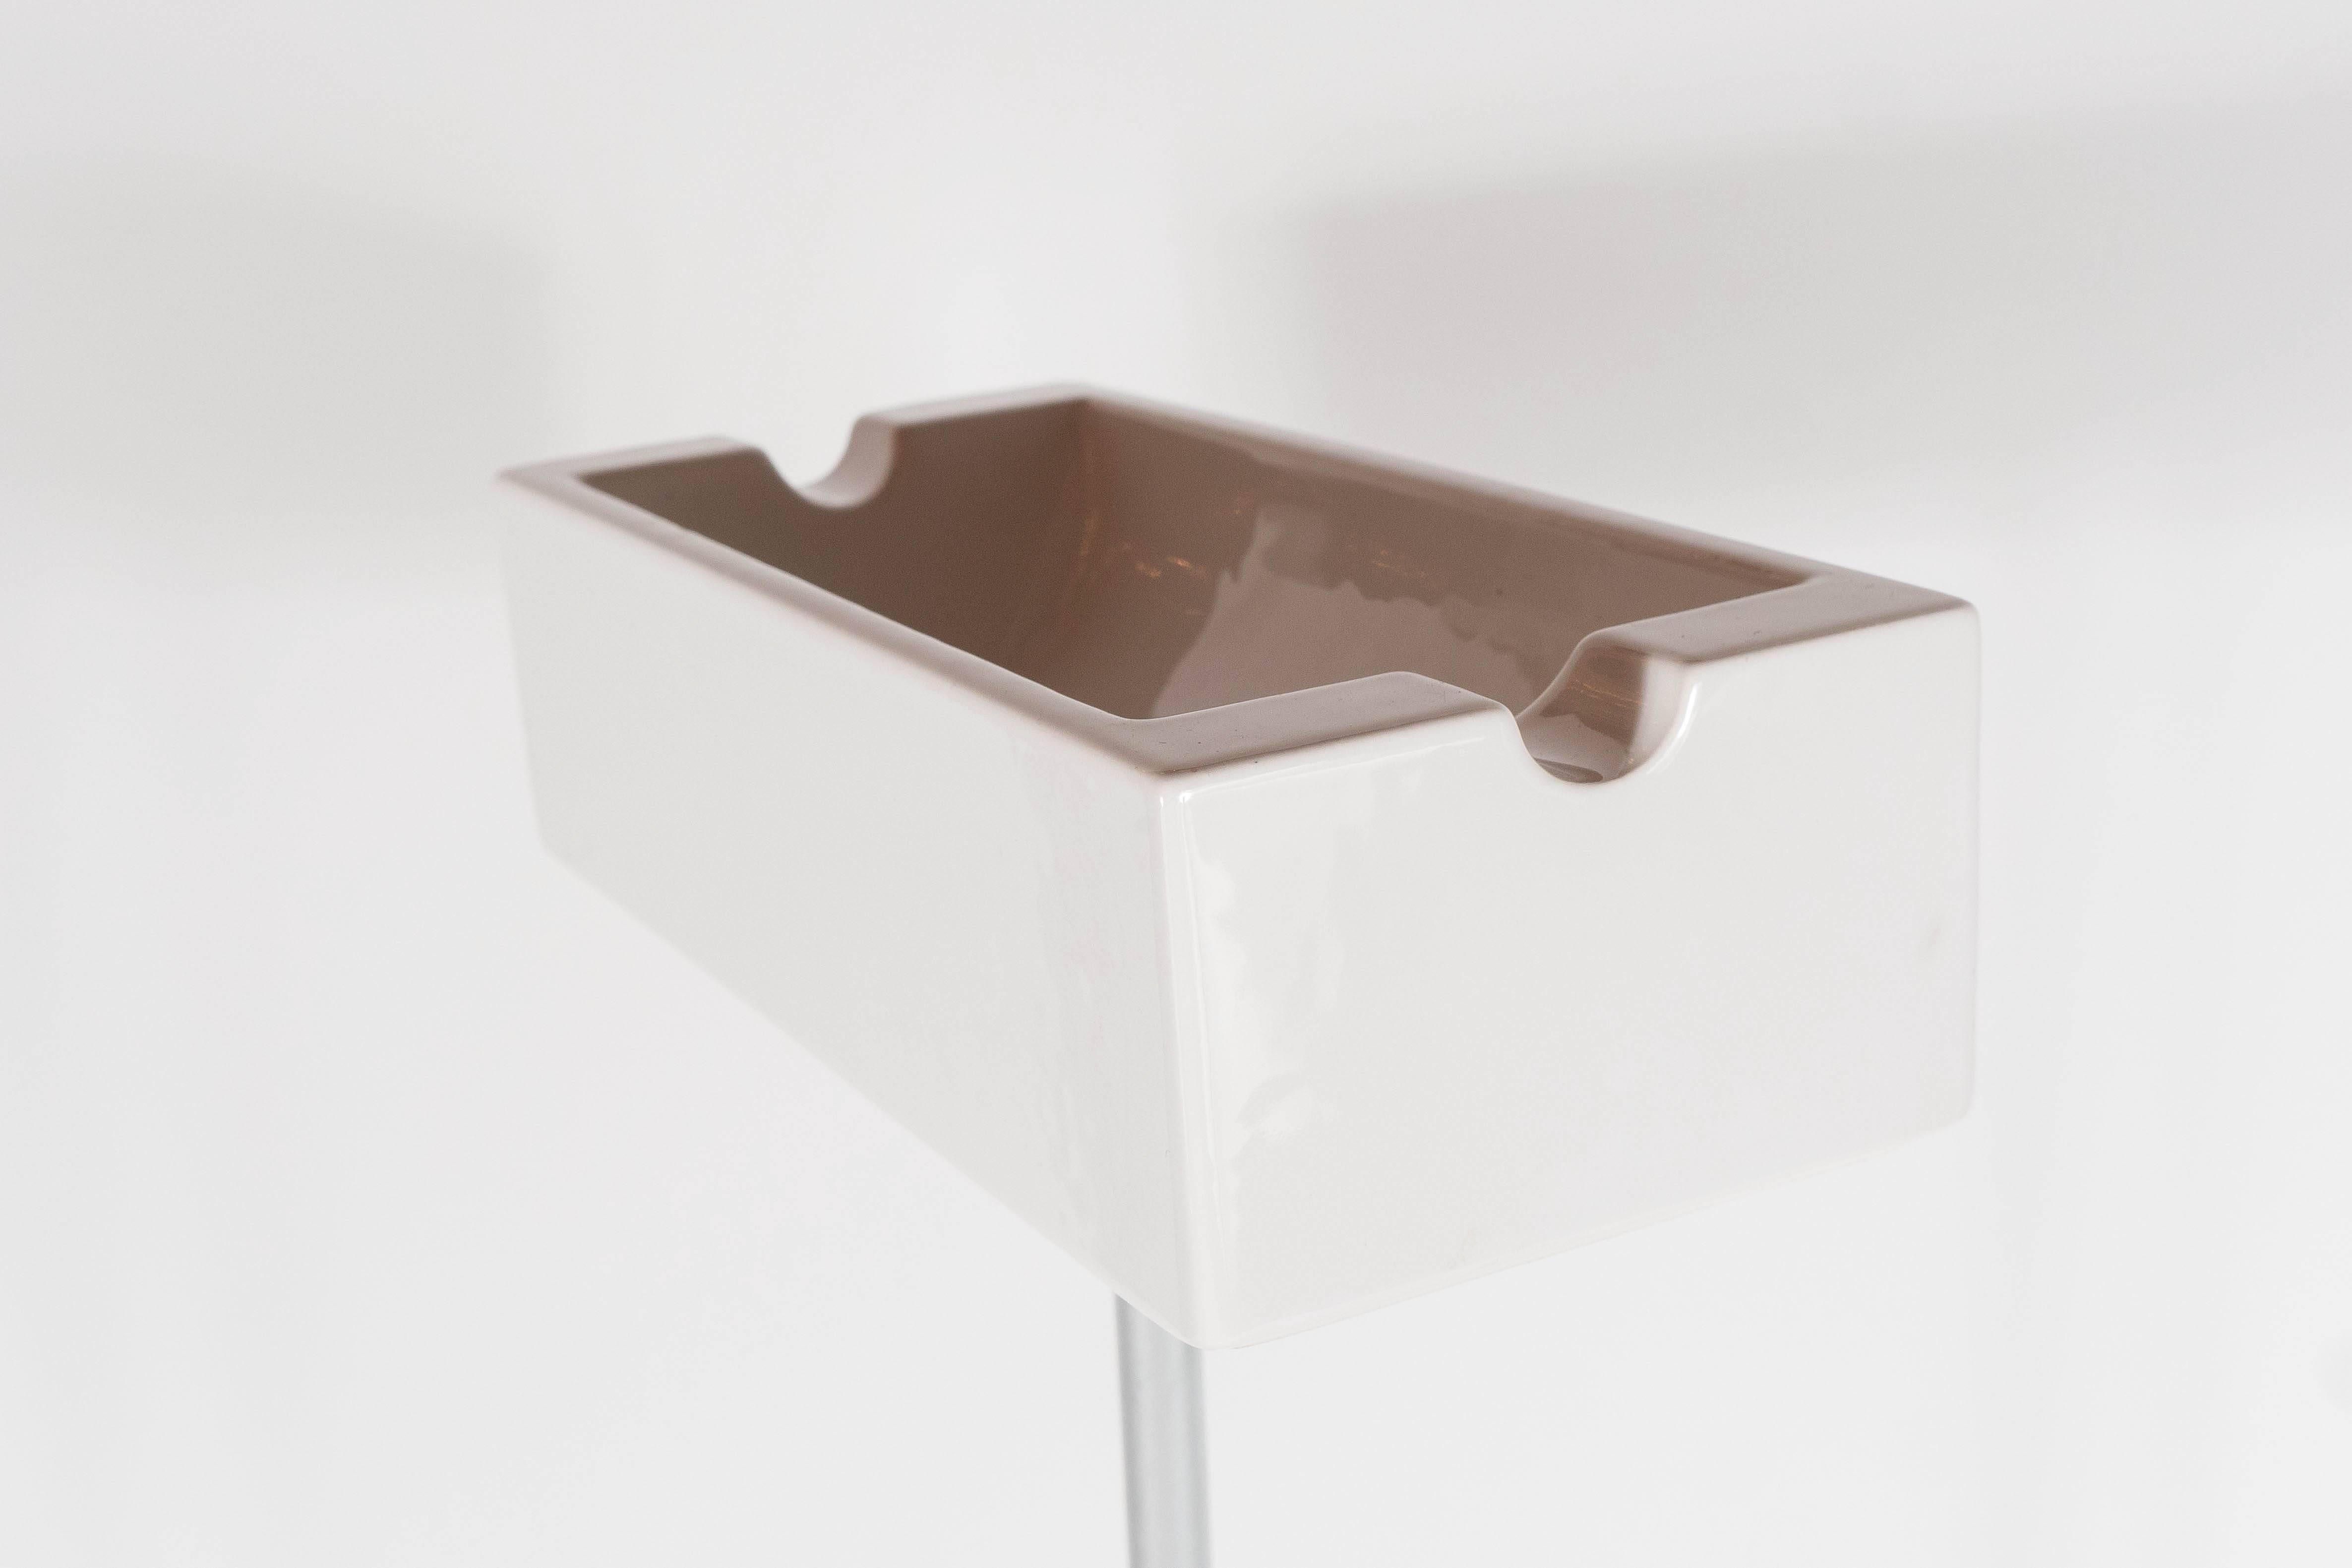 An ultra-stylish Mid-Century modernist cigar stand by Progetto Oggeto. Clean lines make this white glazed ceramic and enamel piece of Italian design and production a perfect addition to any balcony or sitting area. In mint condition.